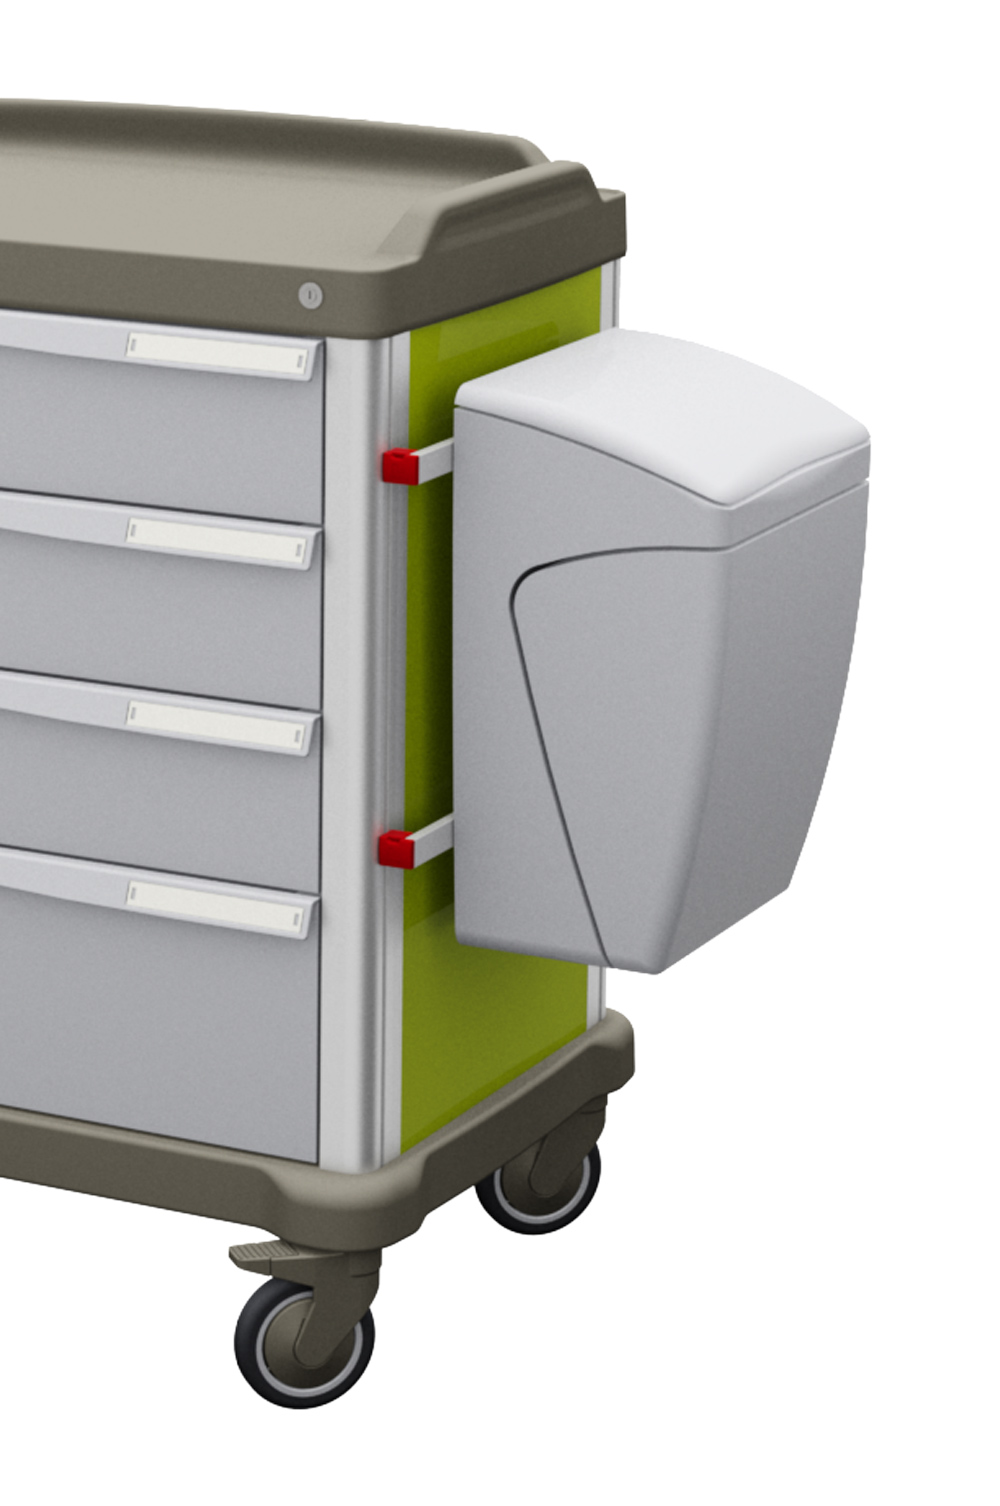 MAXIWALLY knee-operated dustbin in grey/grey on the side of a PRESTO therapy trolley